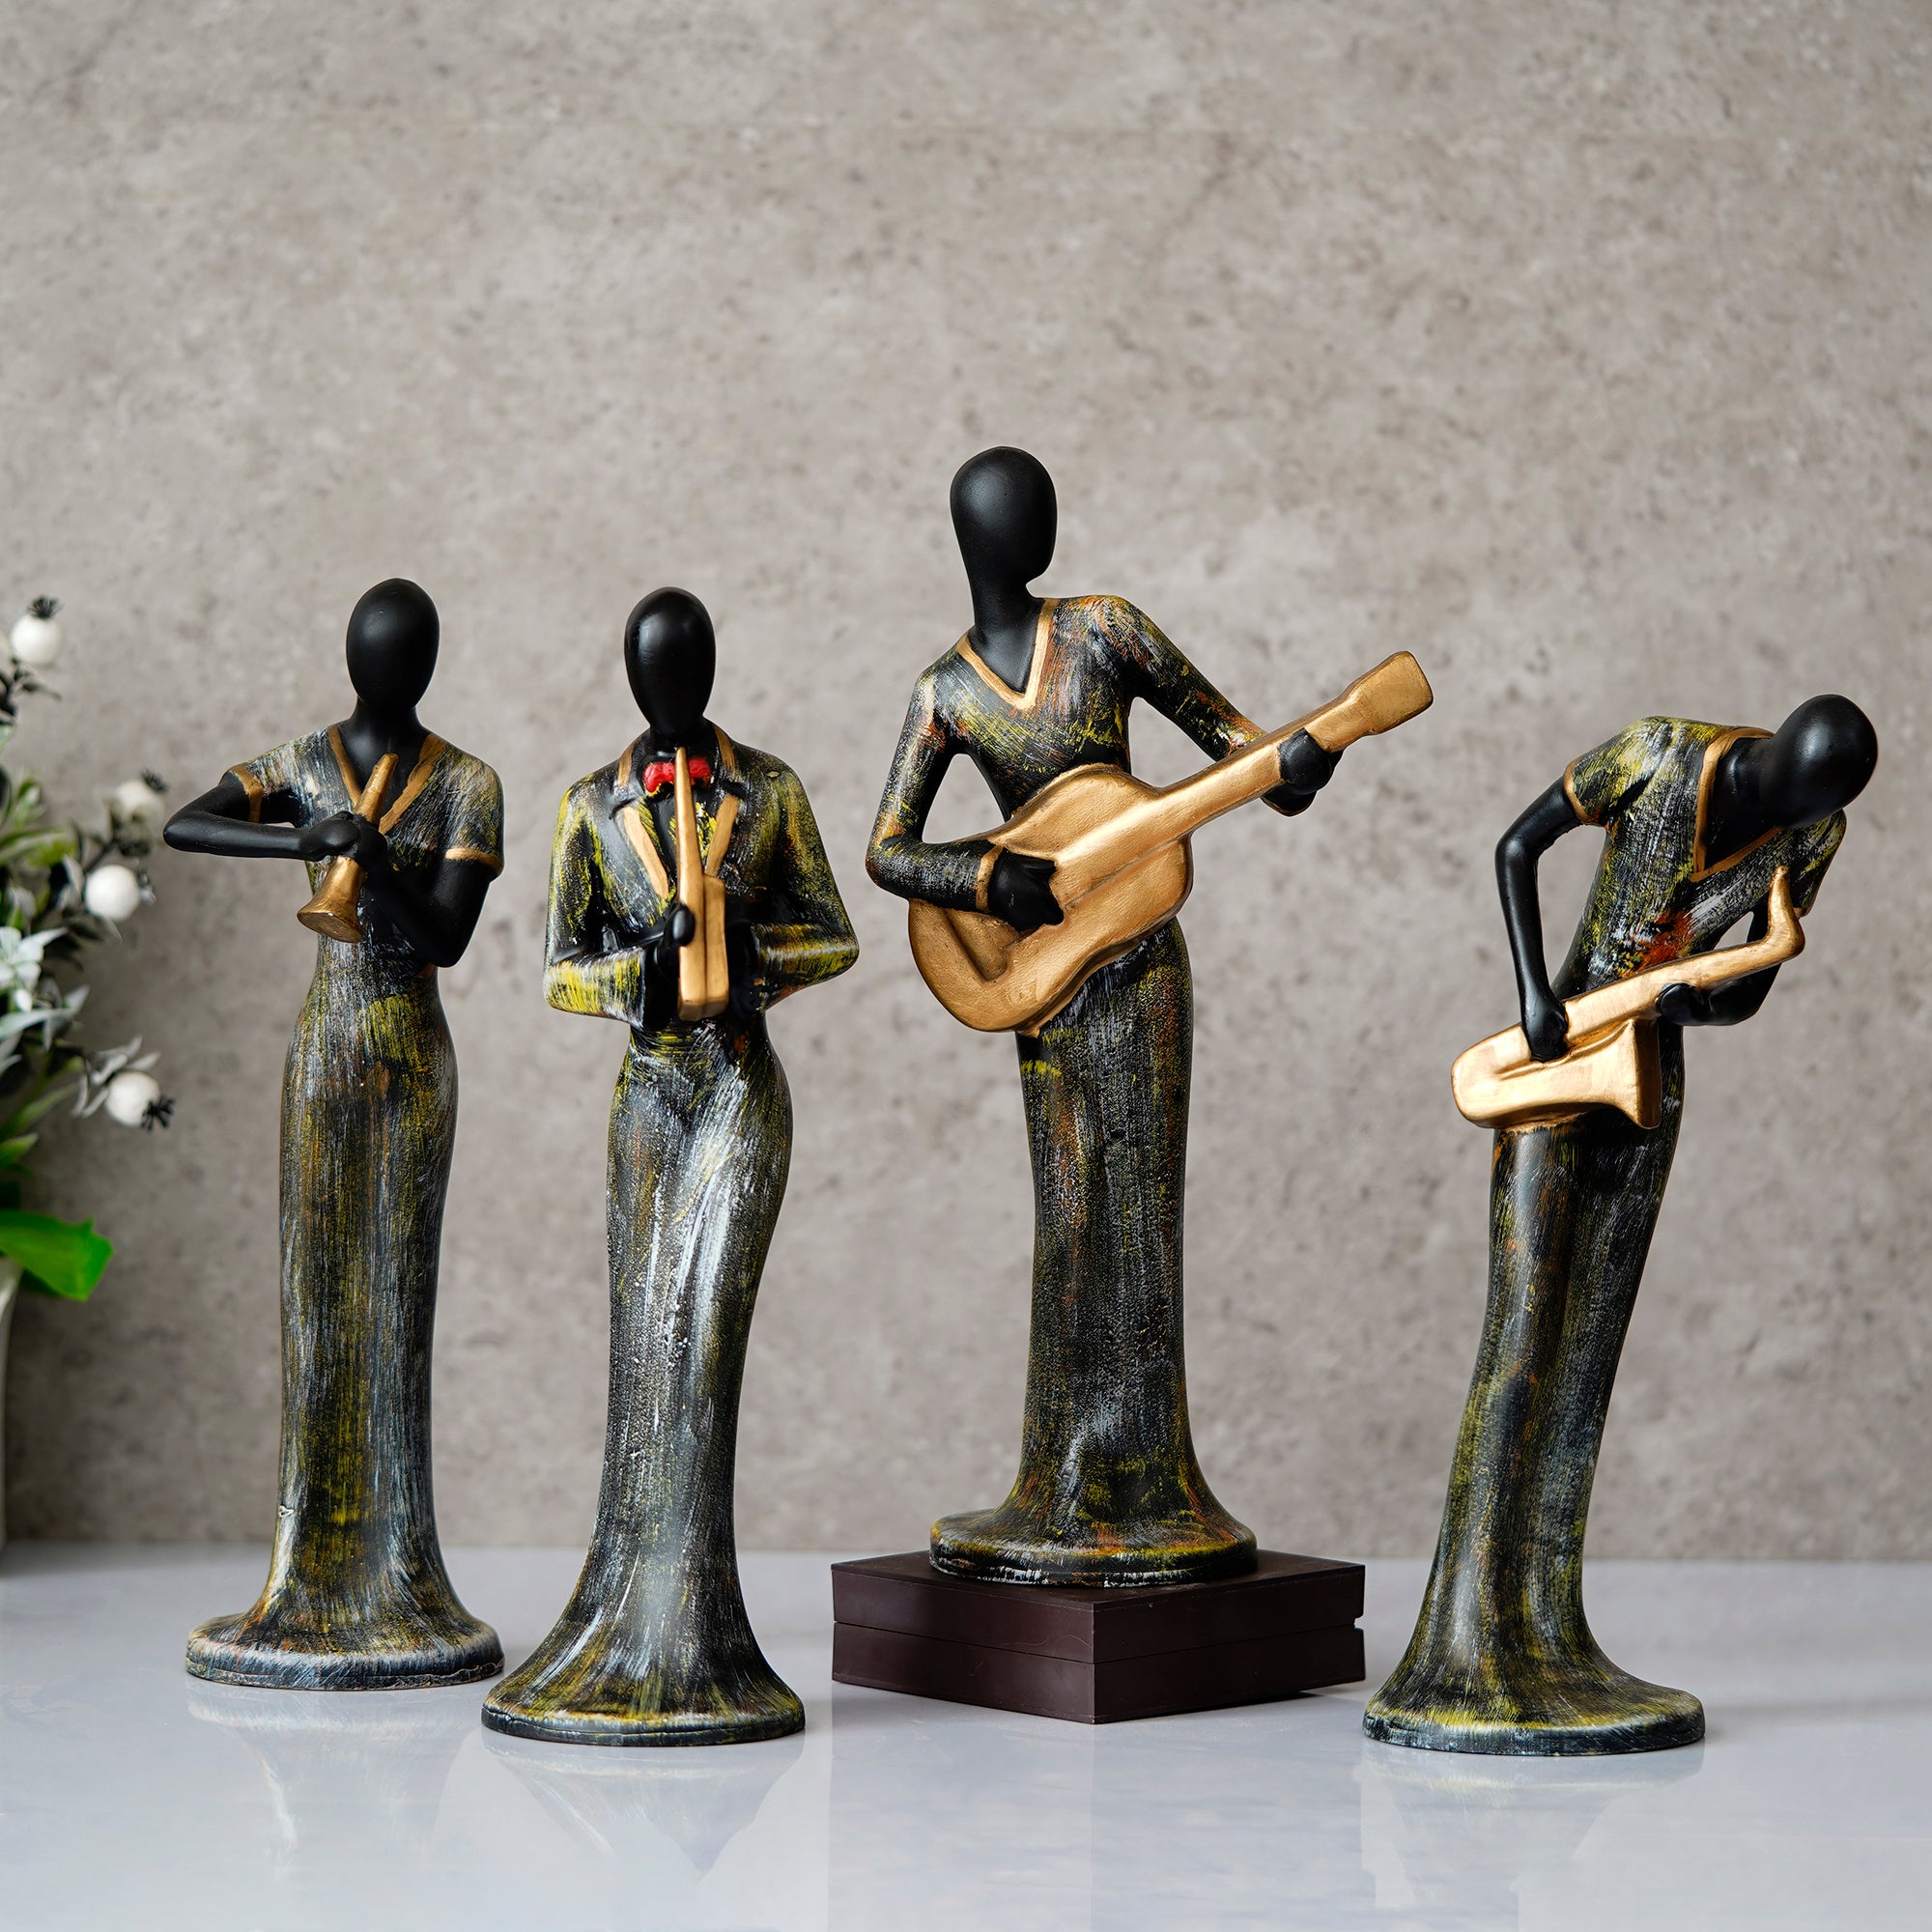 Grey and Black Polyresin Set of 4 Ladies figurines Playing Clarinet, Guitar, Wind, Saxophone Musical Instrument Handcrafted Decorative Showpiece 1